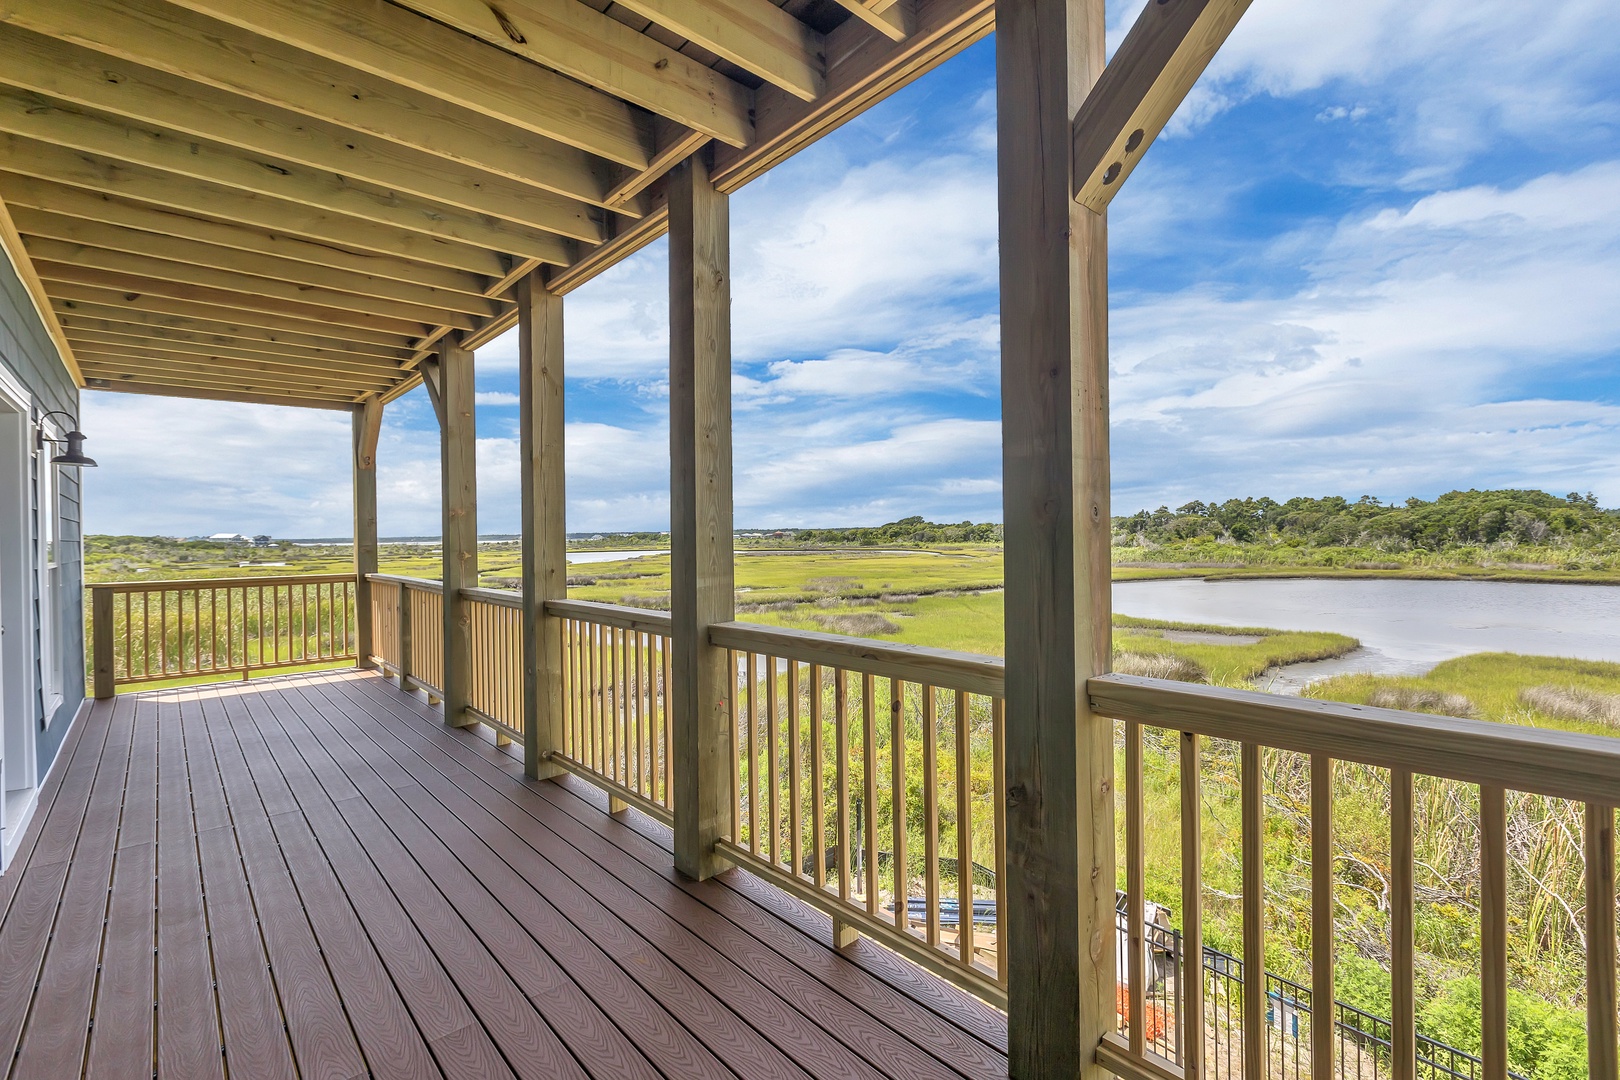 The covered second level balcony with estuary views